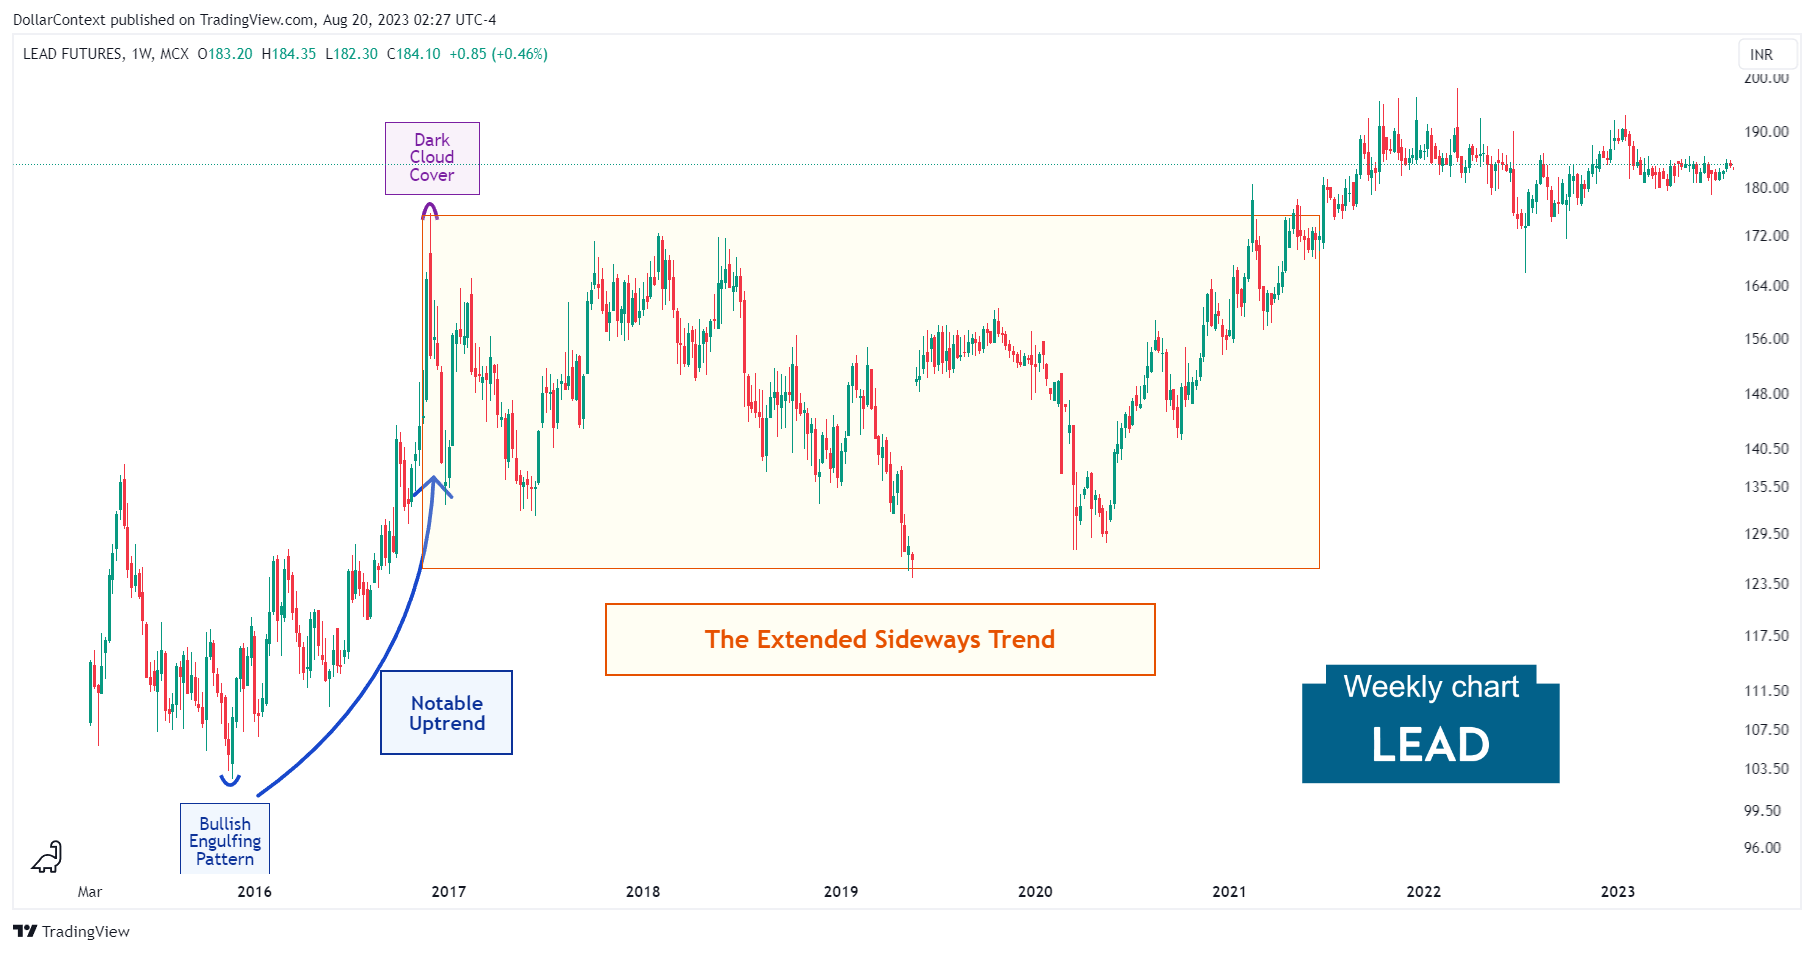 Lead Futures: Sideways Trend from 2017 to 2021 (Weekly Chart)